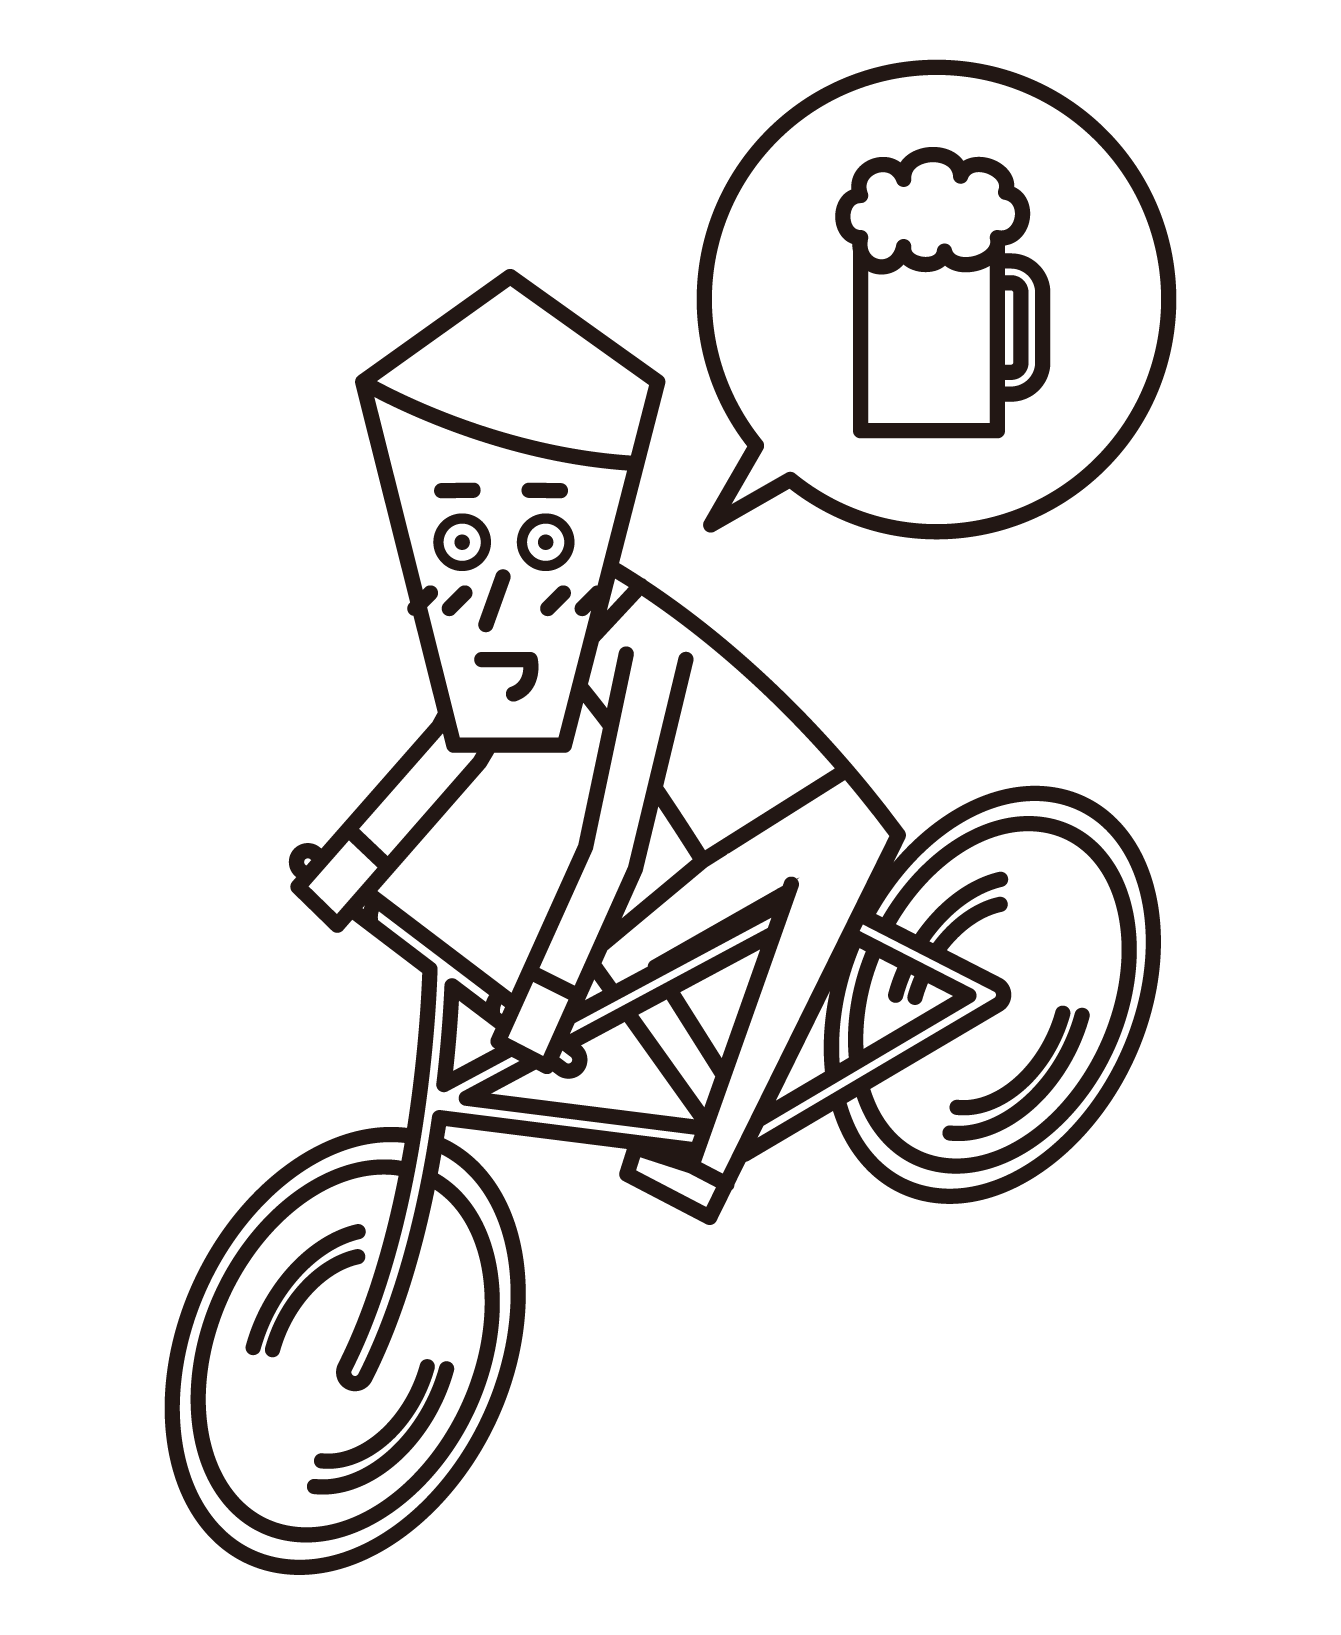 Illustration of a man driving a bicycle